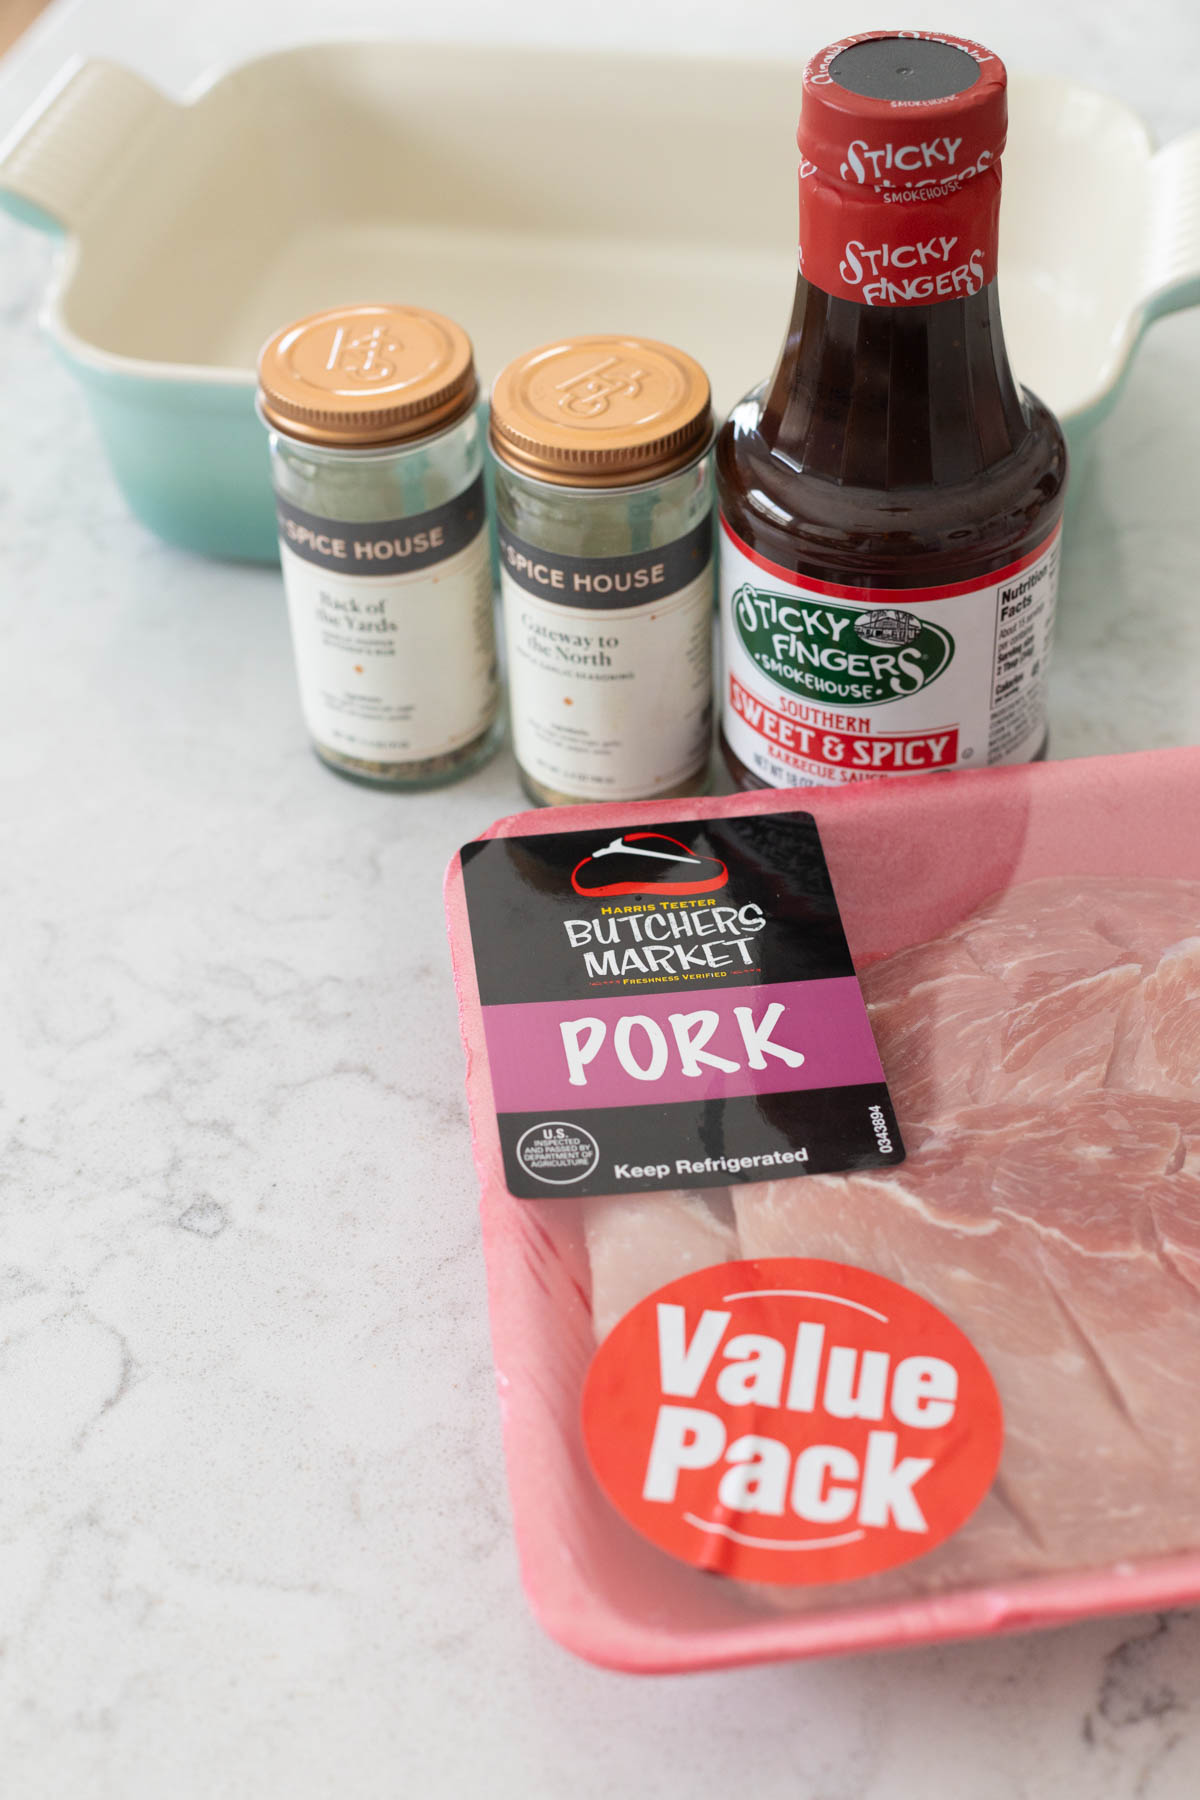 The ingredients to bake boneless pork ribs are on the counter.